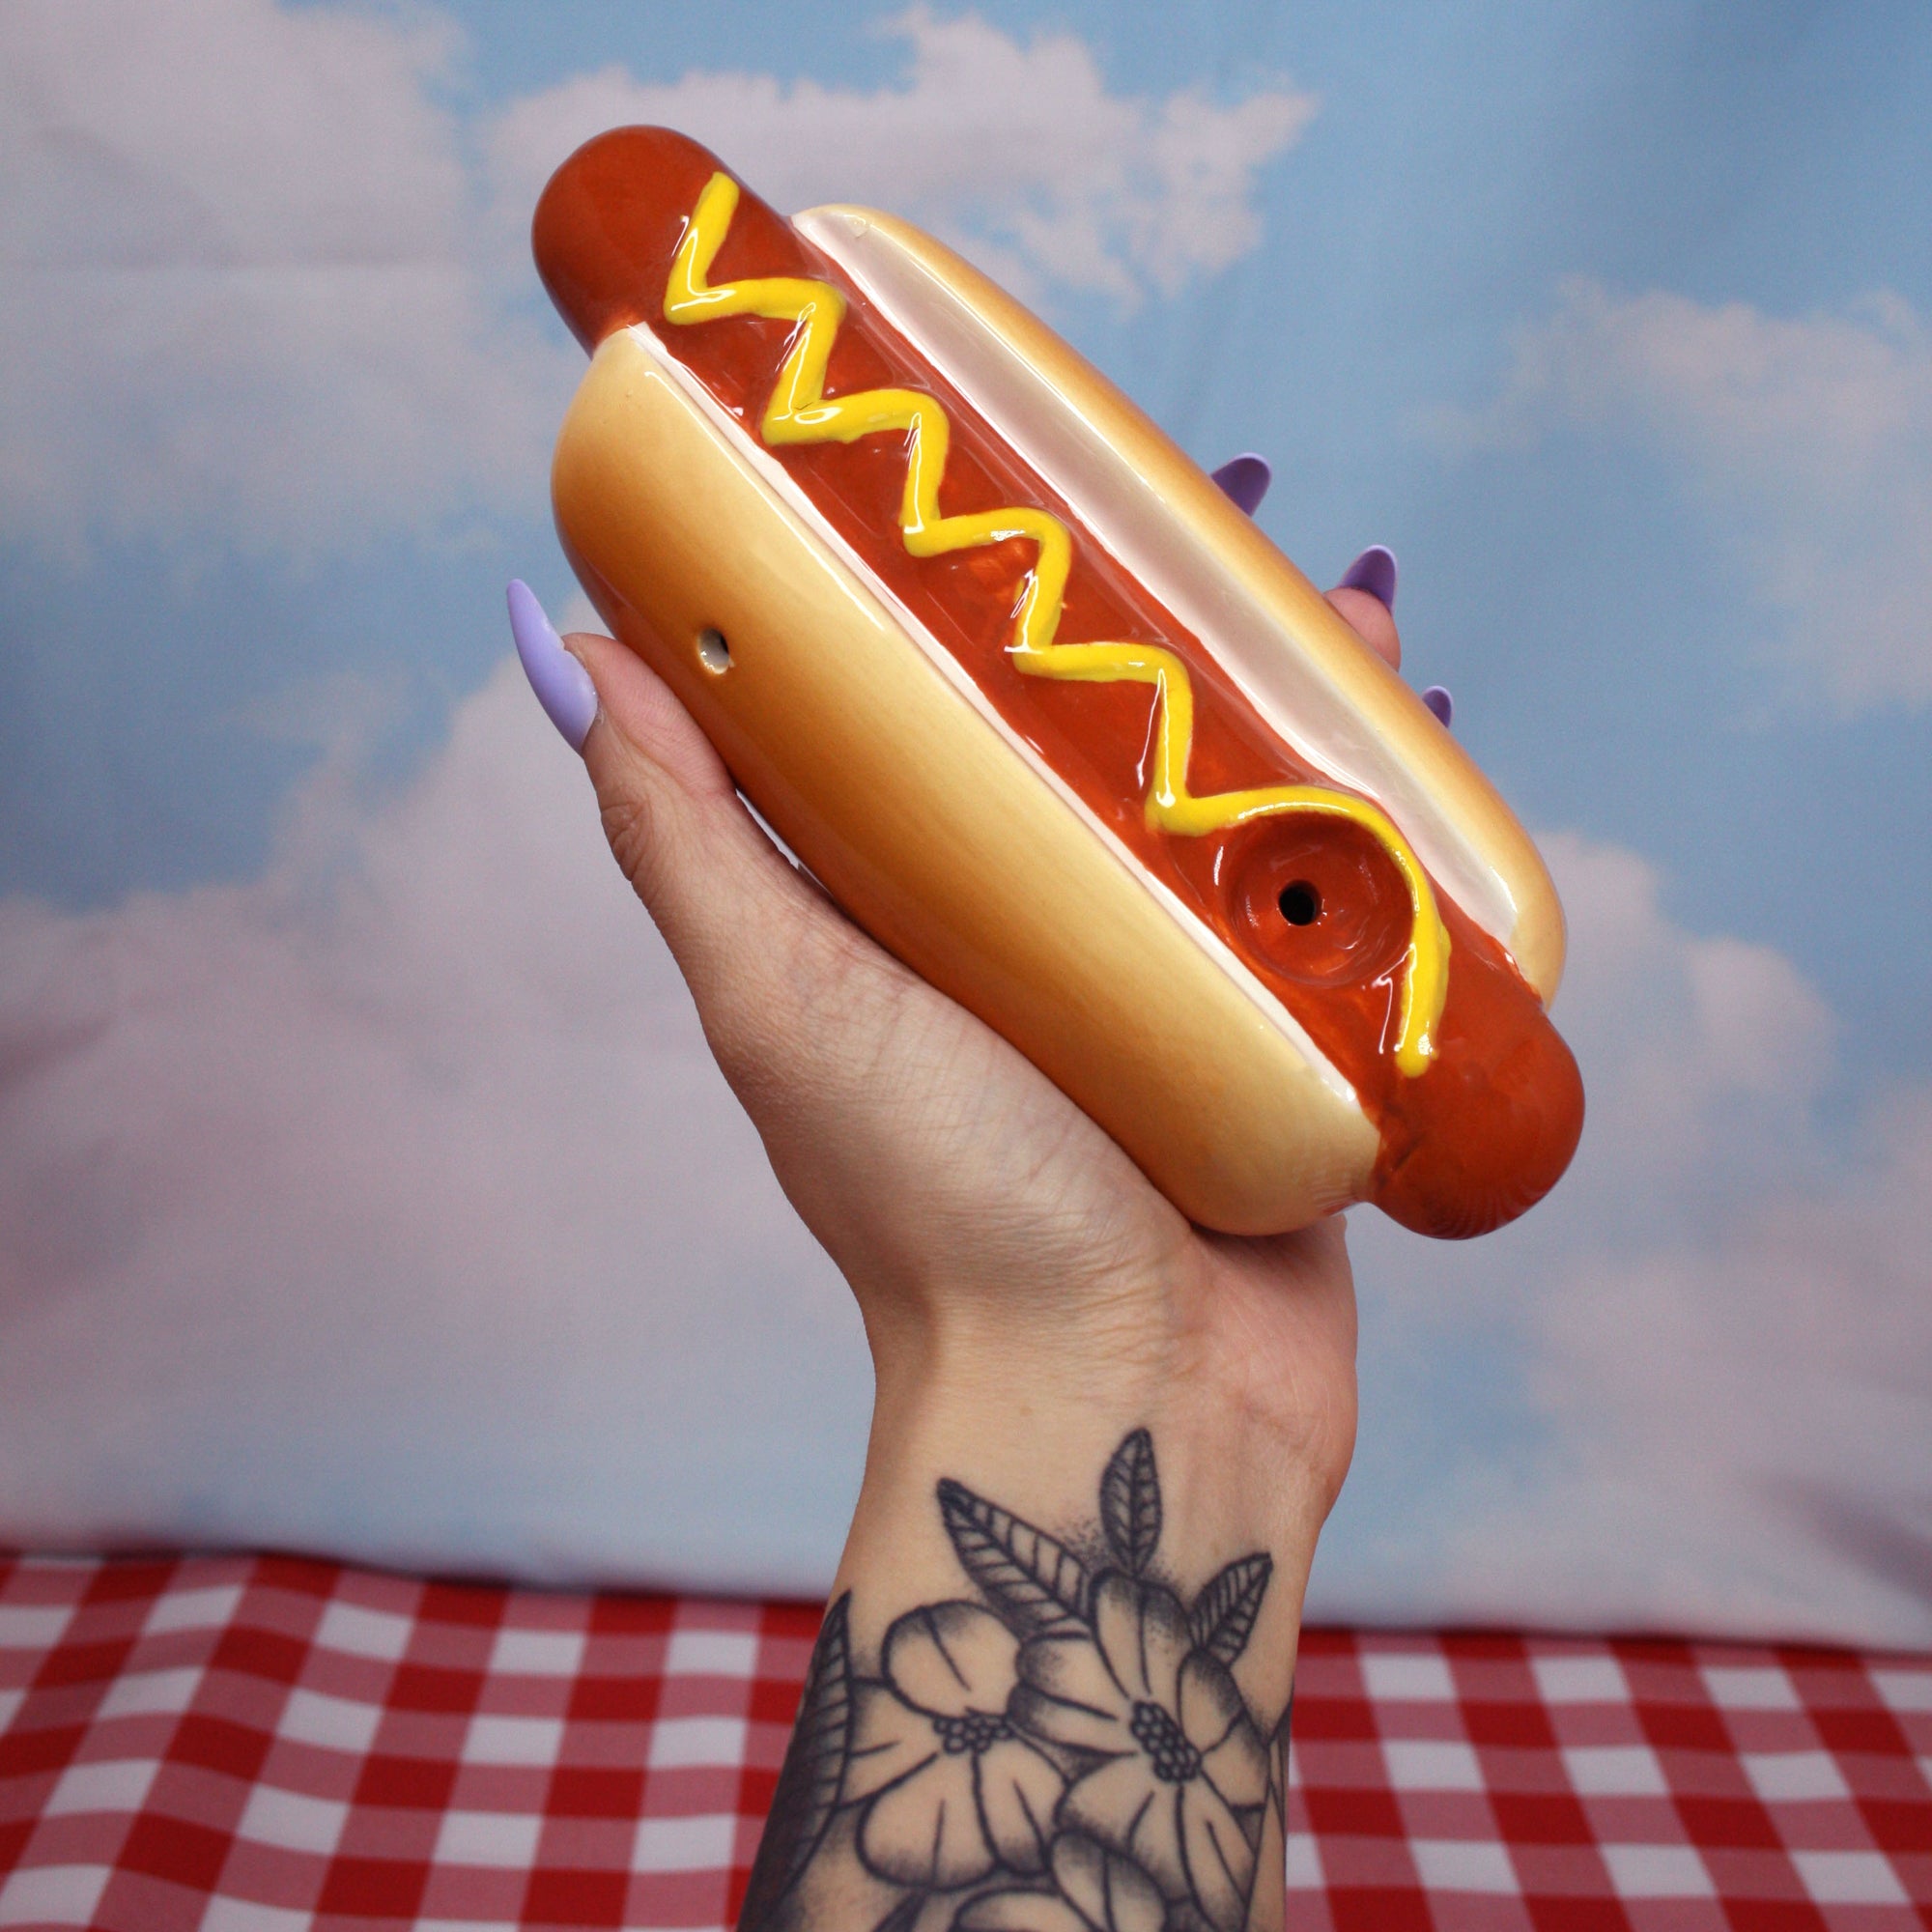 Hot dog pipe